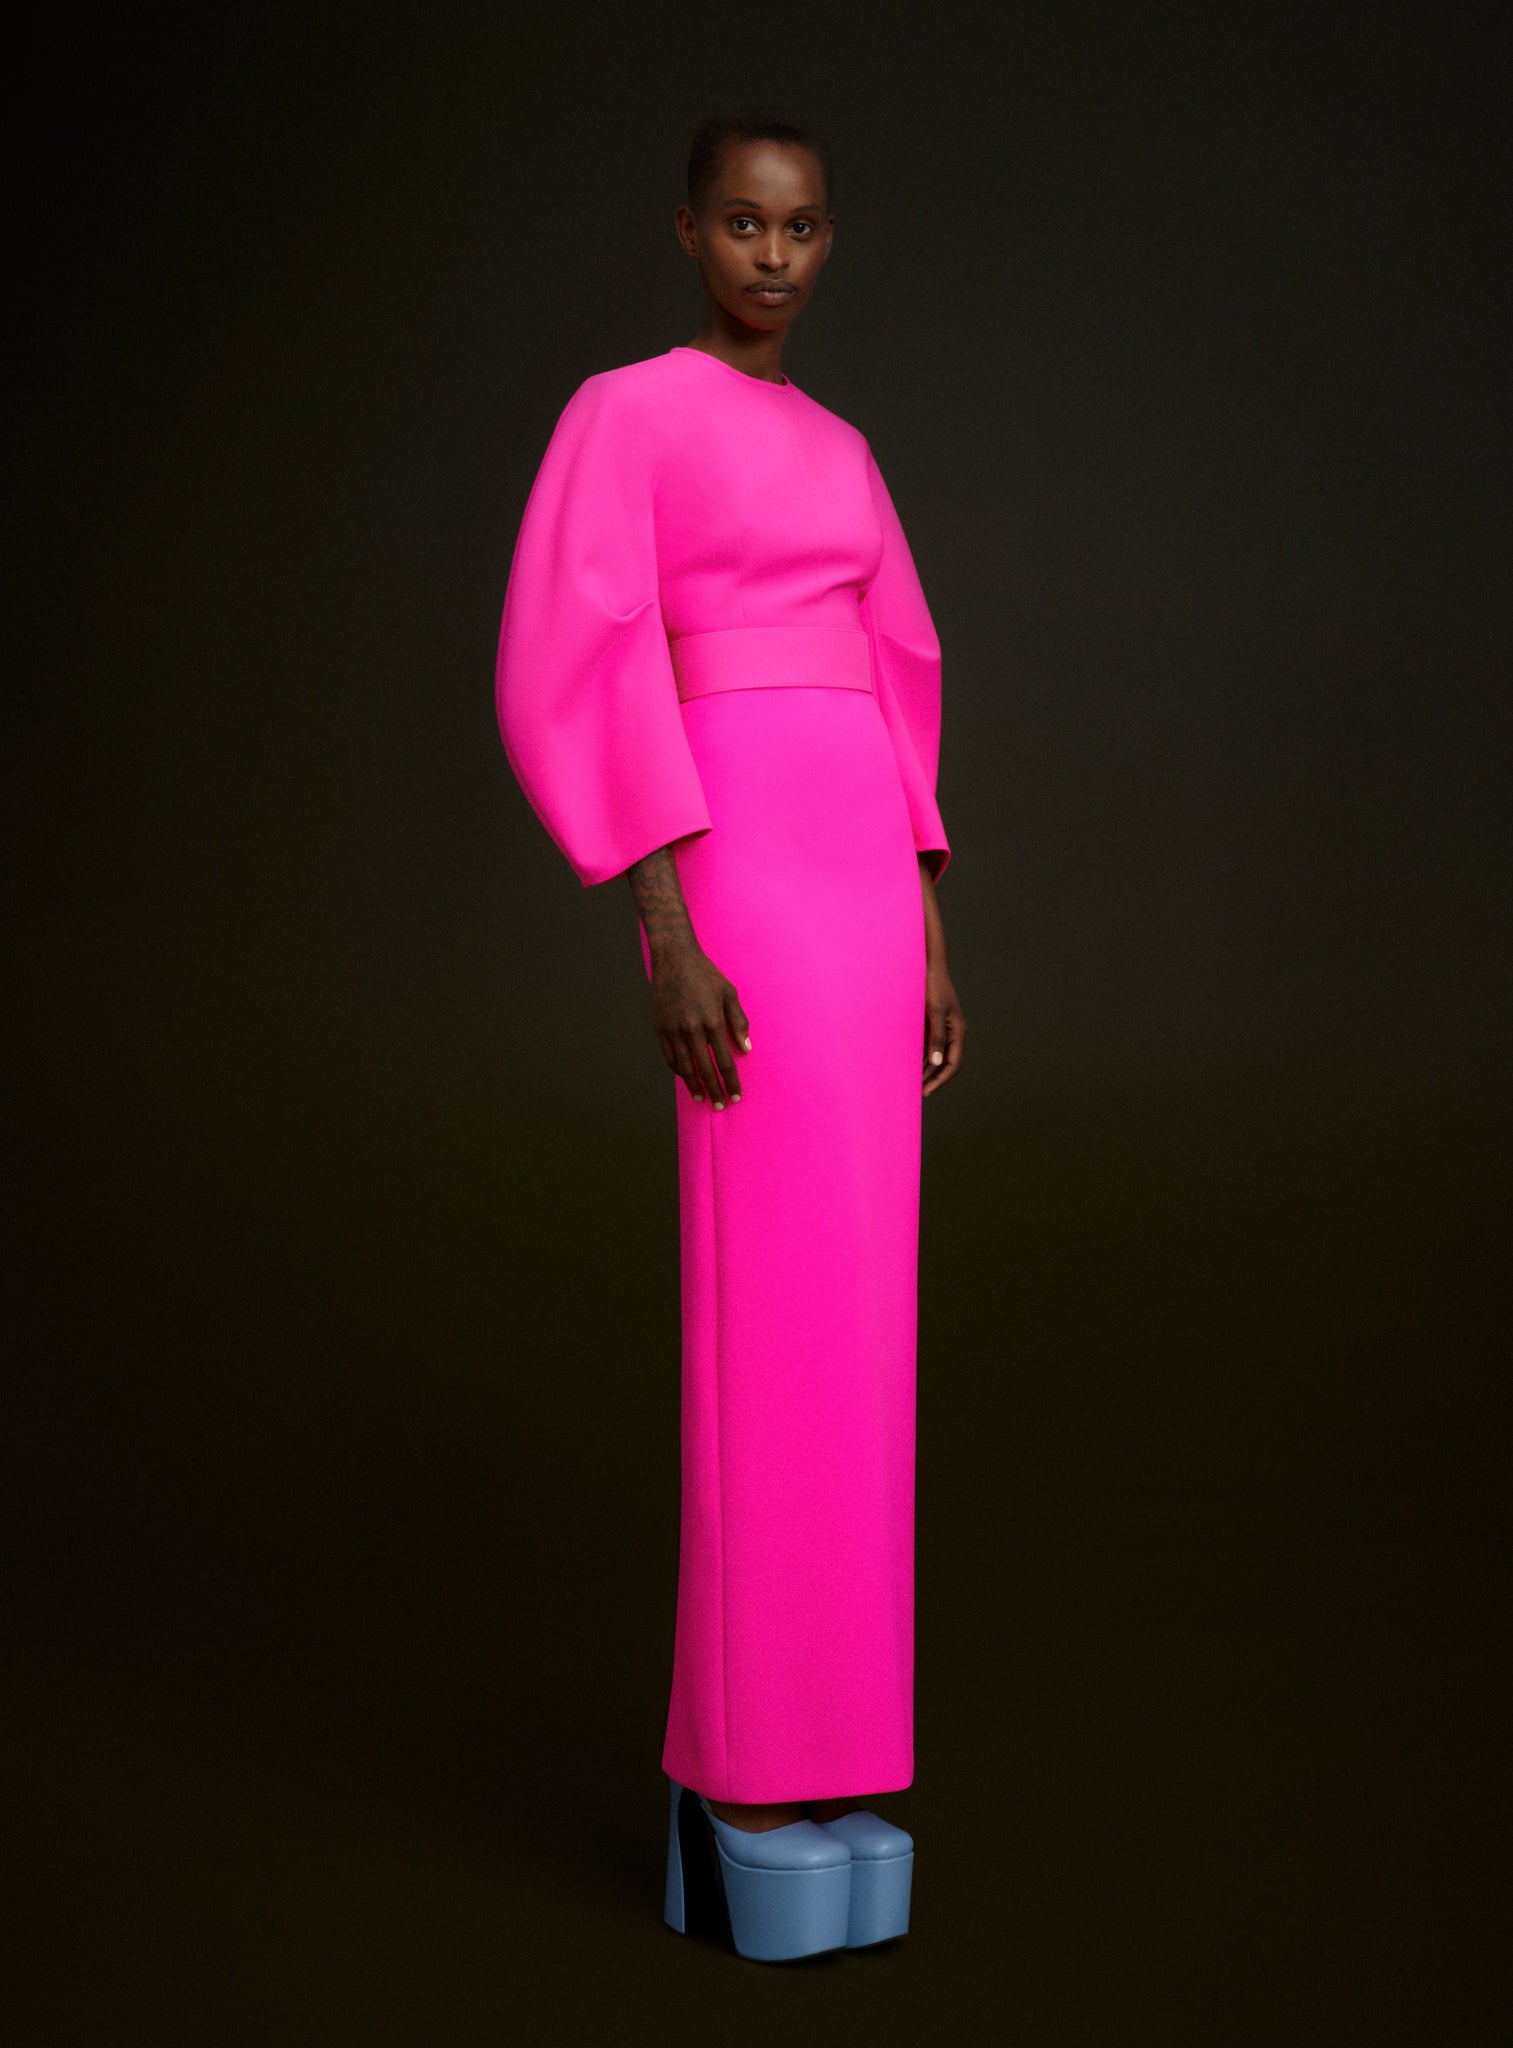 The Allegra Maxi Dress in Hot Pink